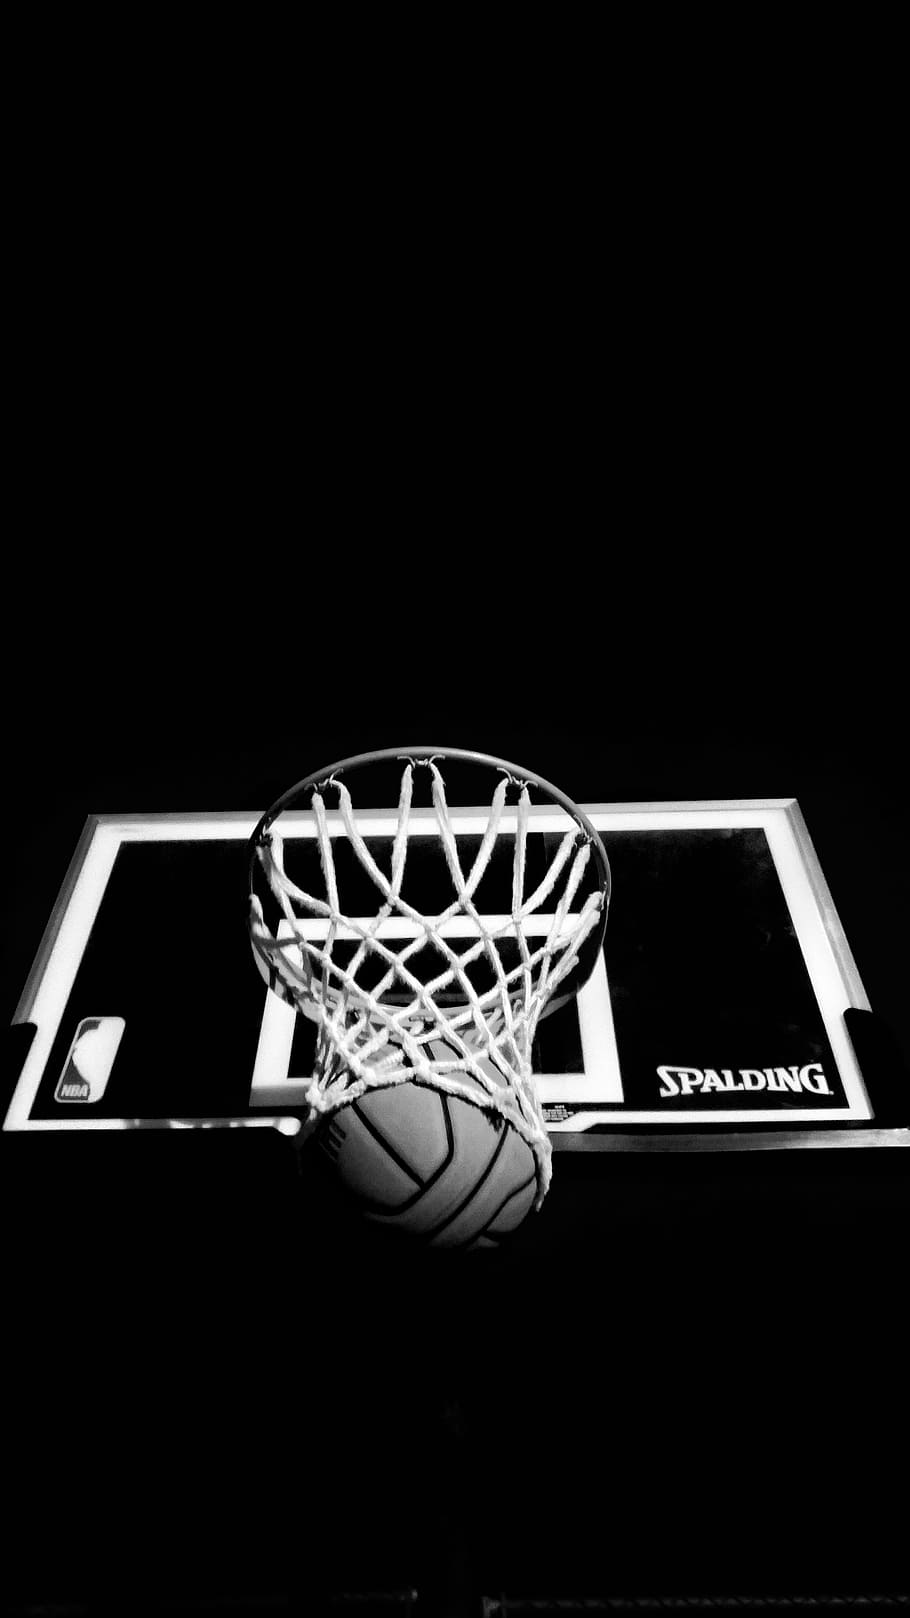 grayscale photography of Spalding basketball hoop and ball, photograpy